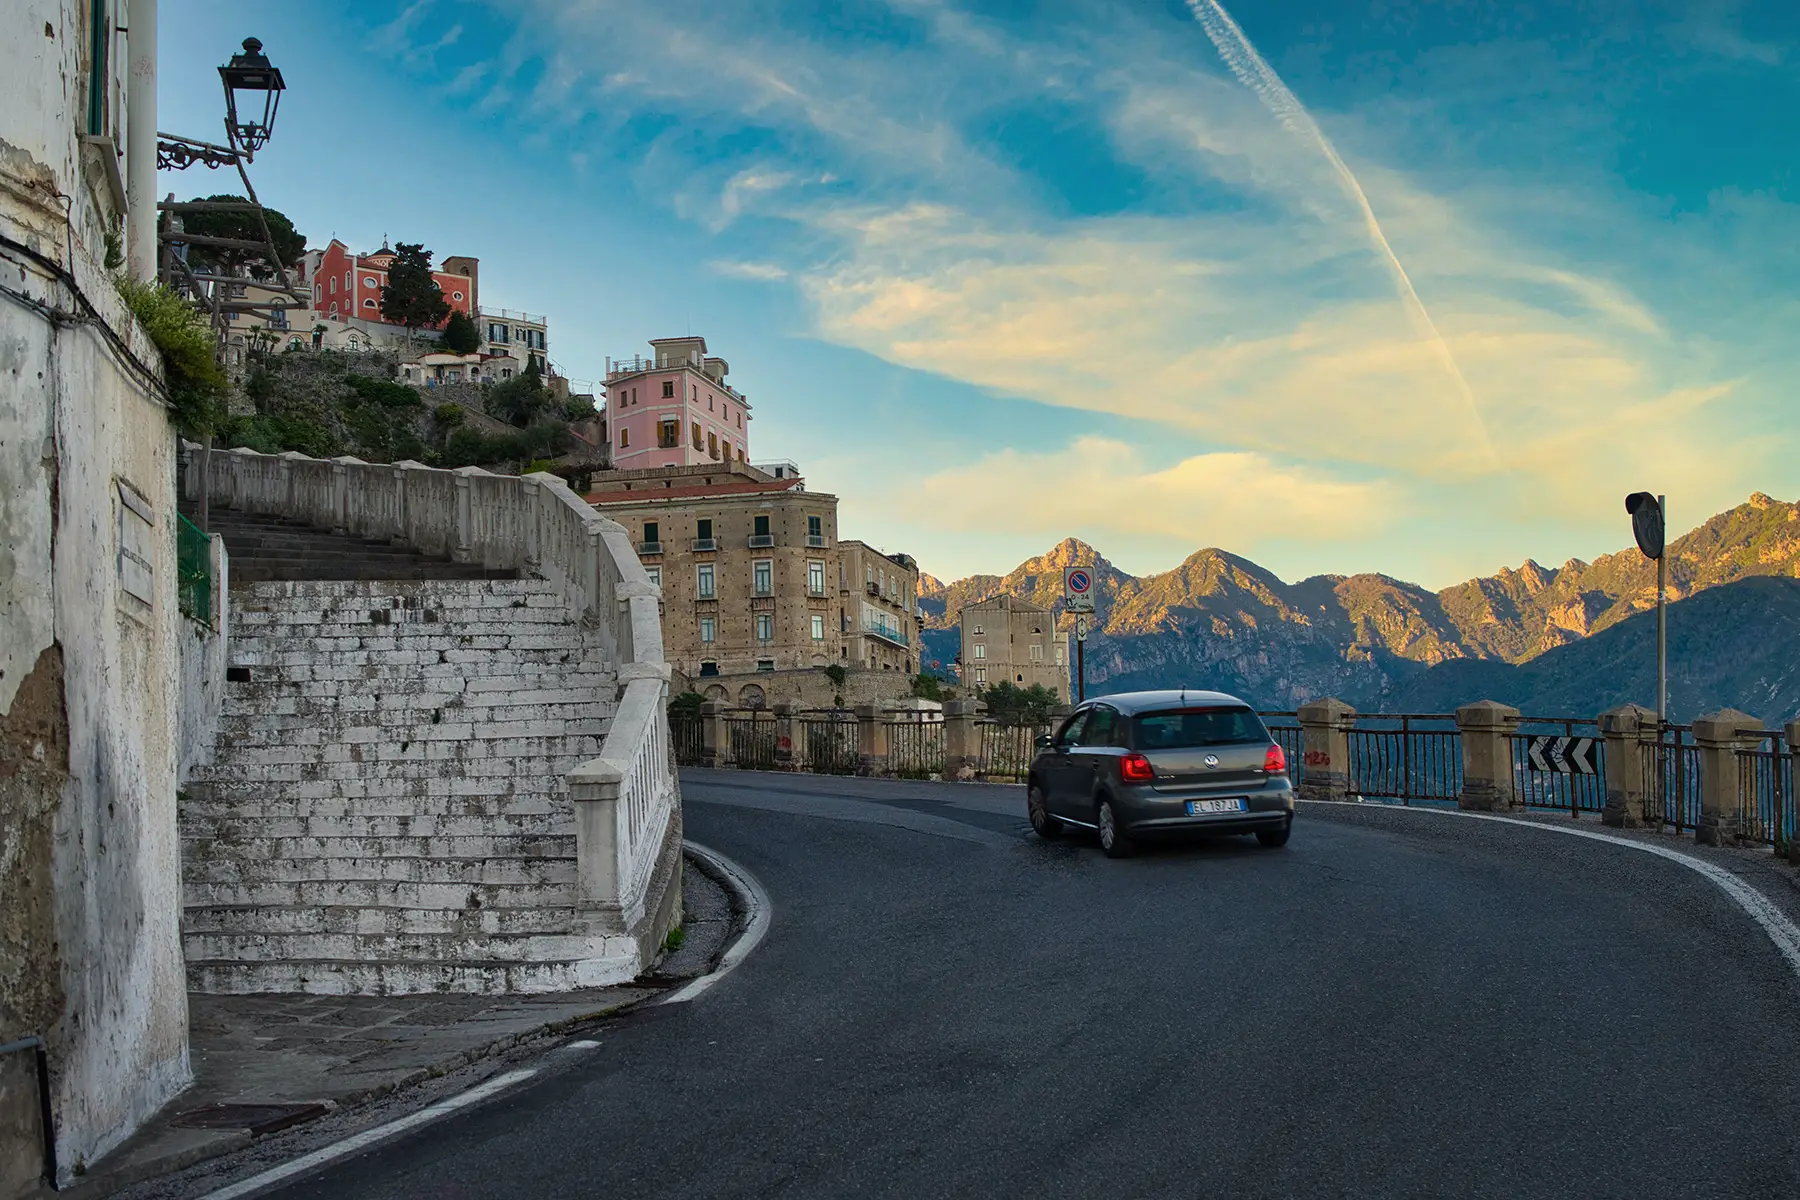 A car takes a curve on a beautiful mountain road with old Italian houses lining the street